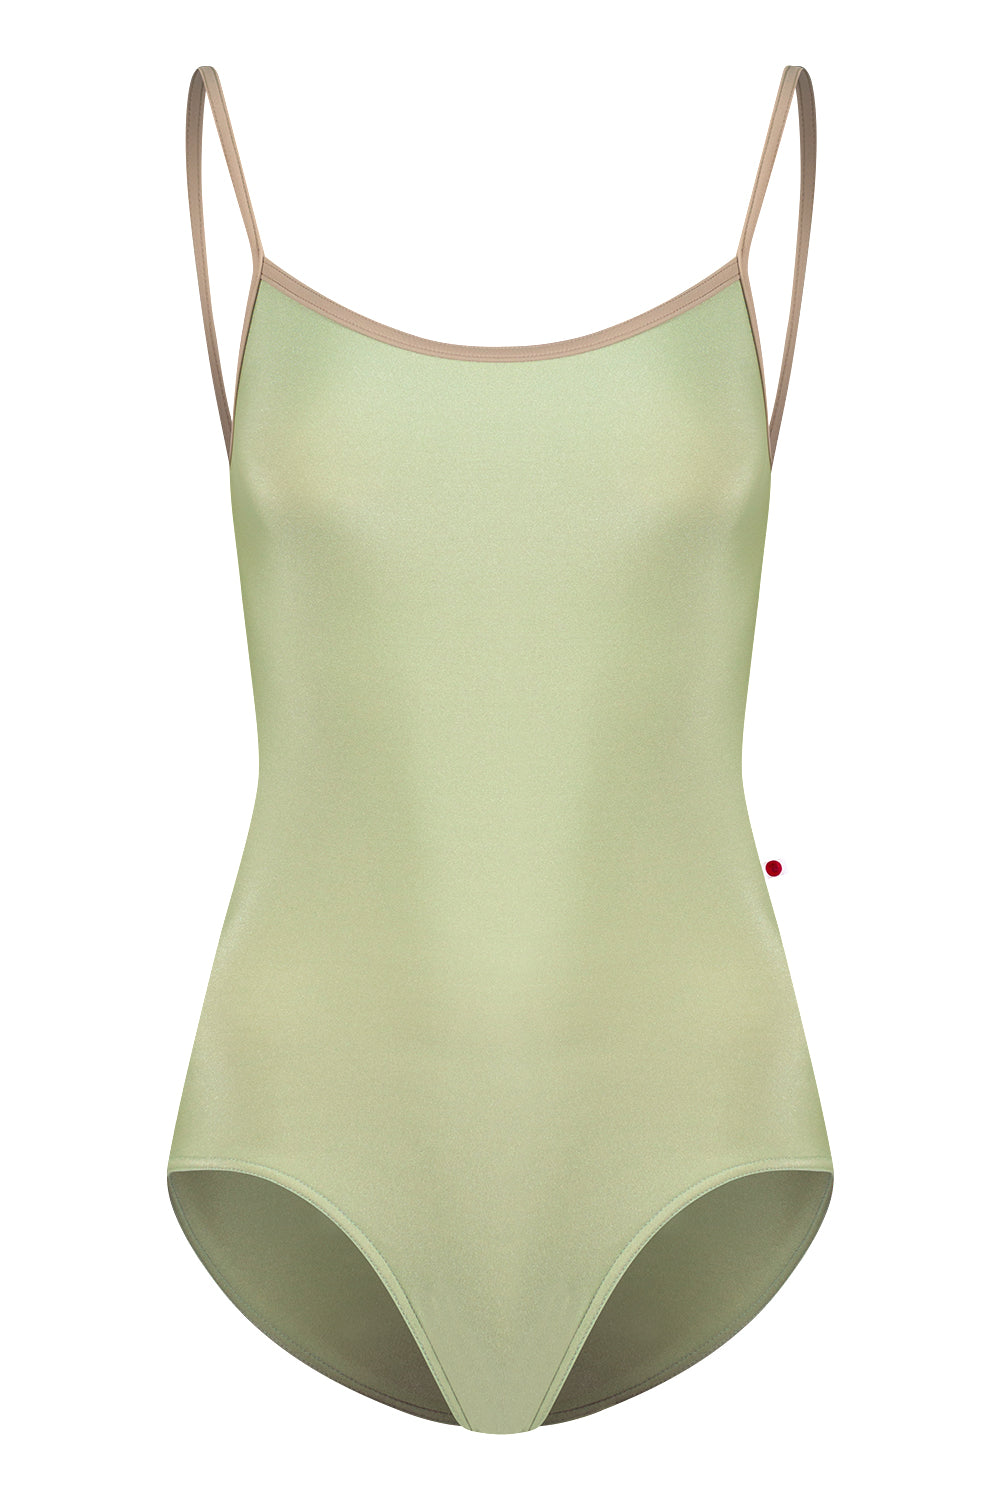 Kiki leotard in N-Ginko body color with T-Mosaic trim color